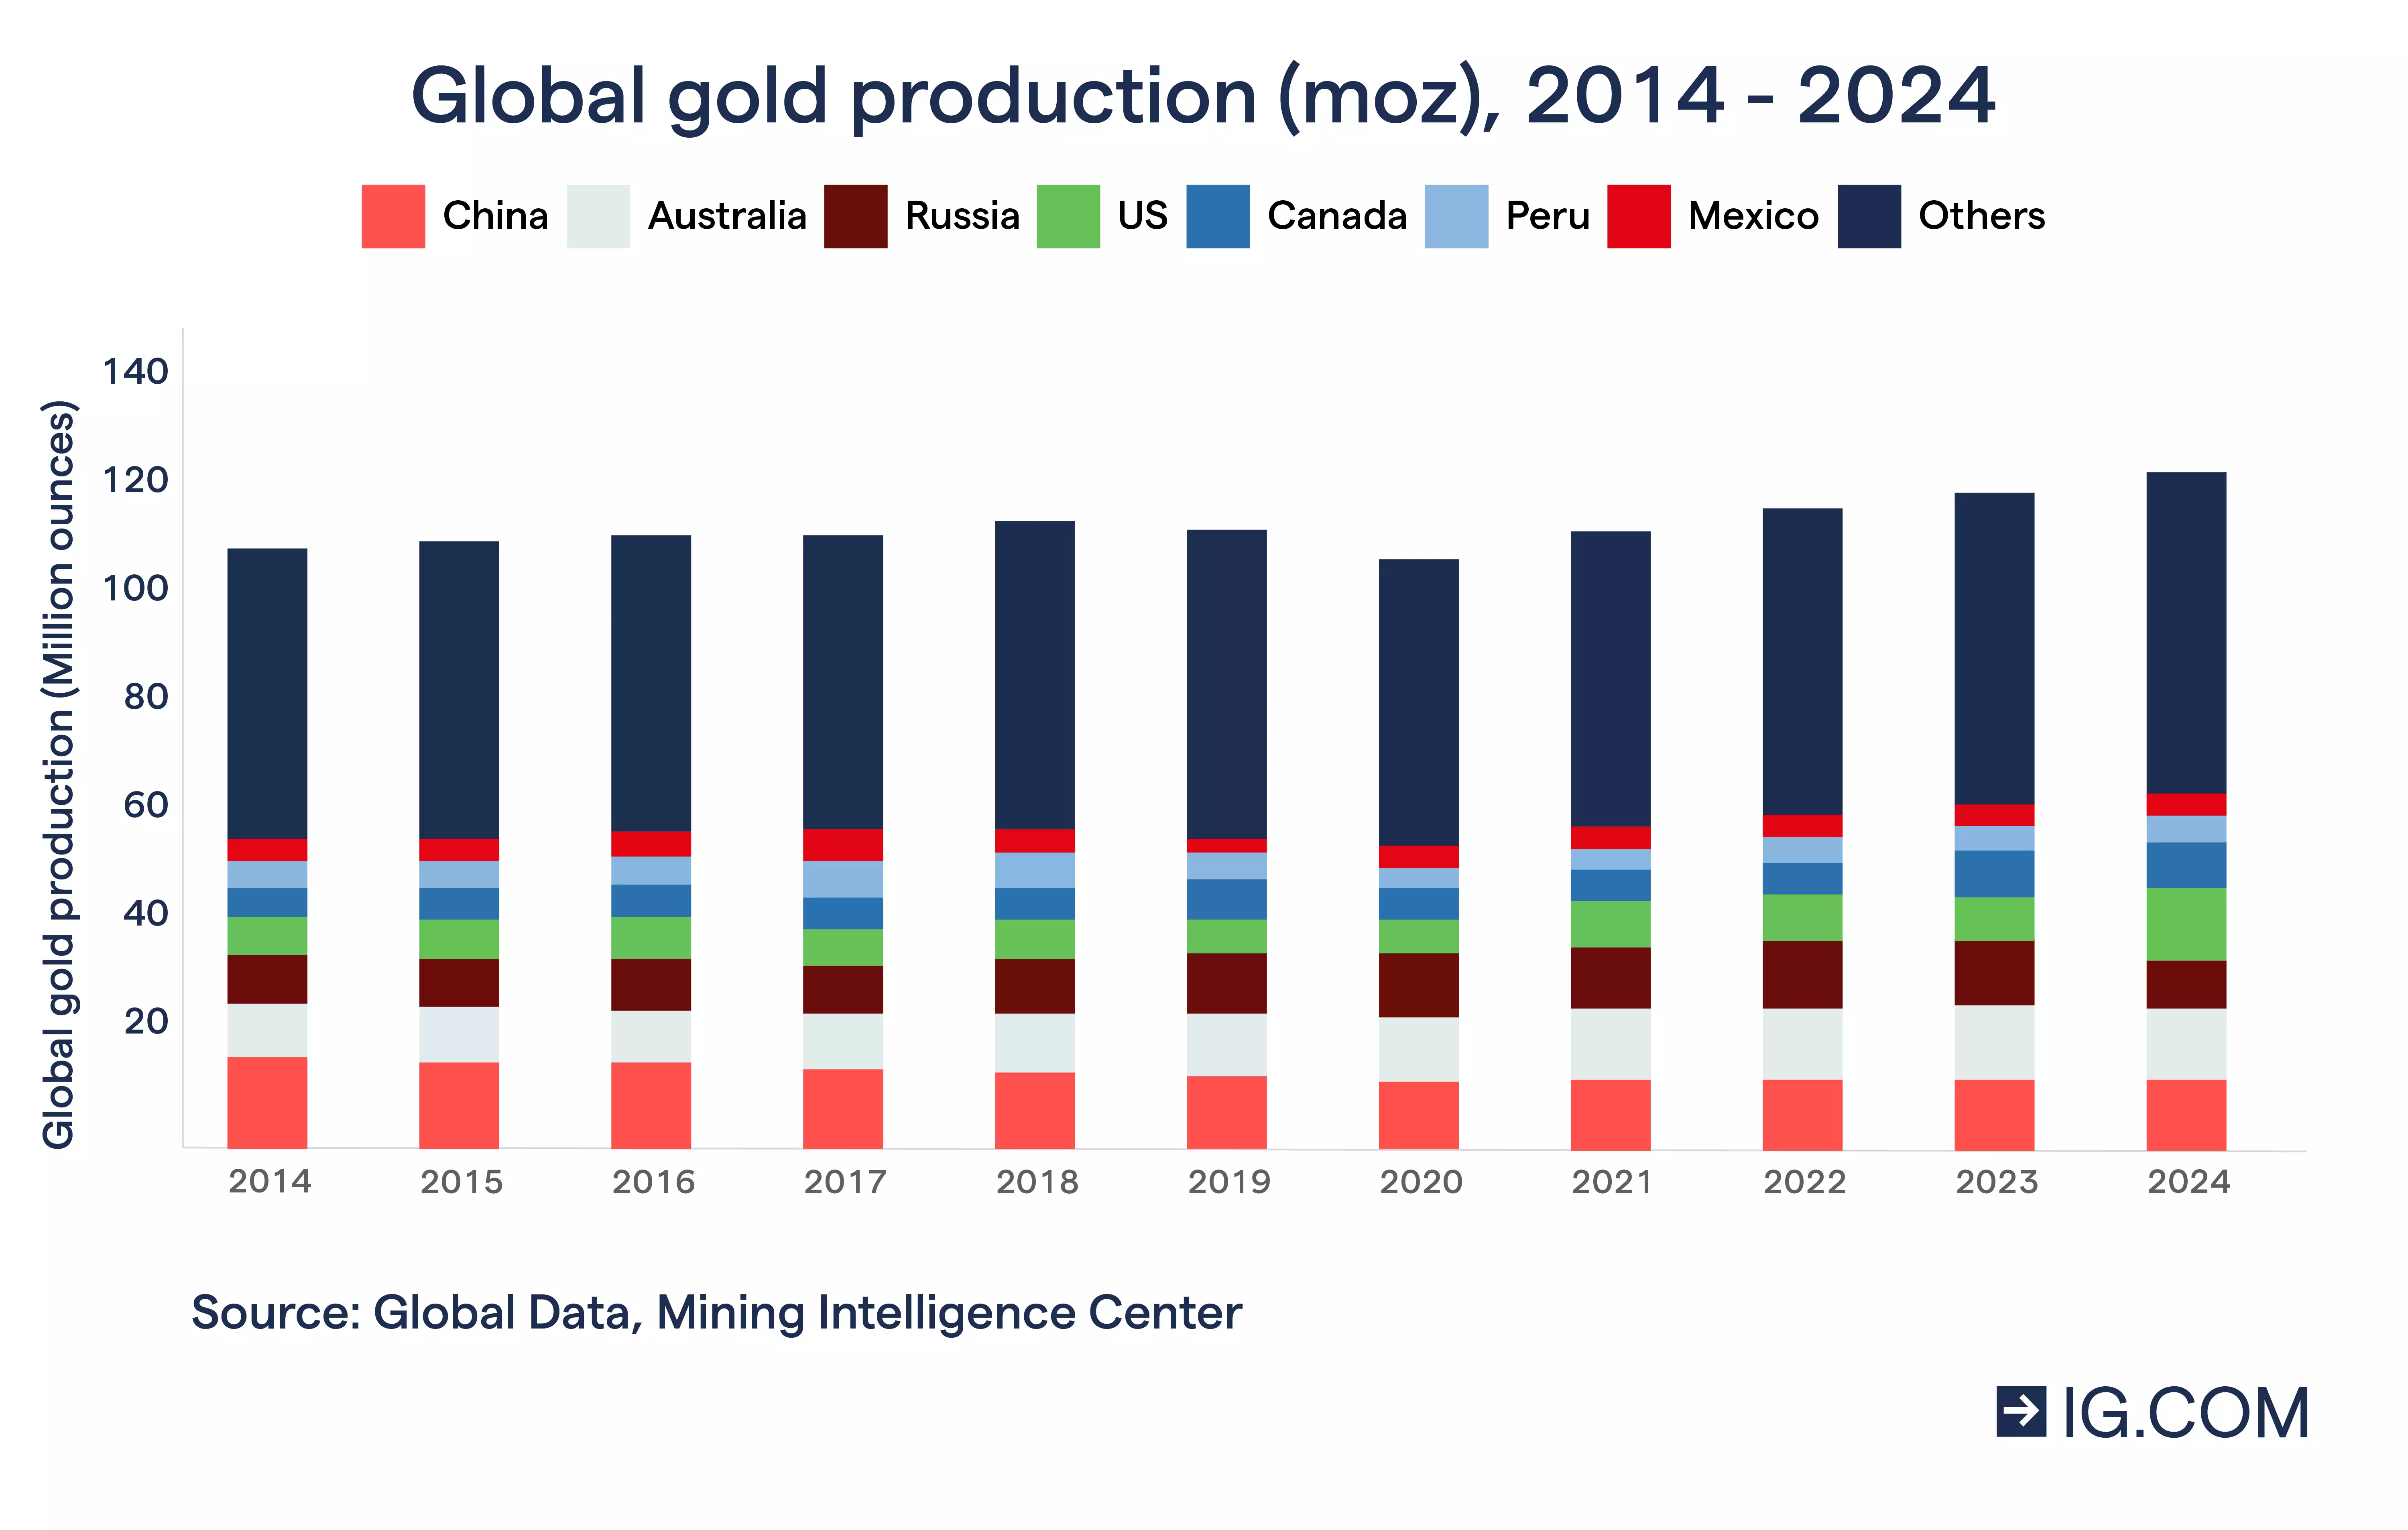 Bar chart showing the market share of gold producers from 2014 to 2024.